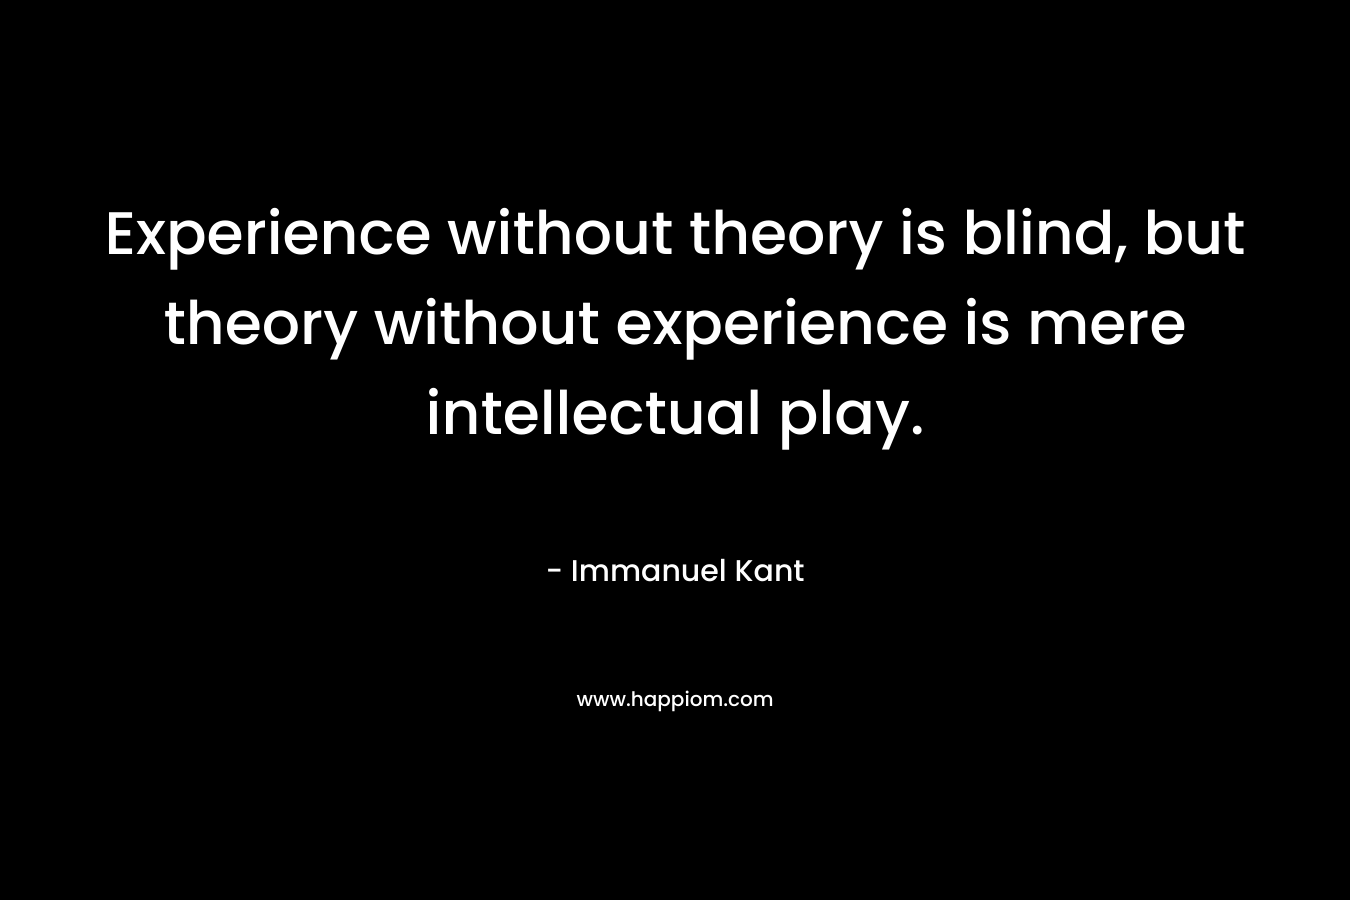 Experience without theory is blind, but theory without experience is mere intellectual play.